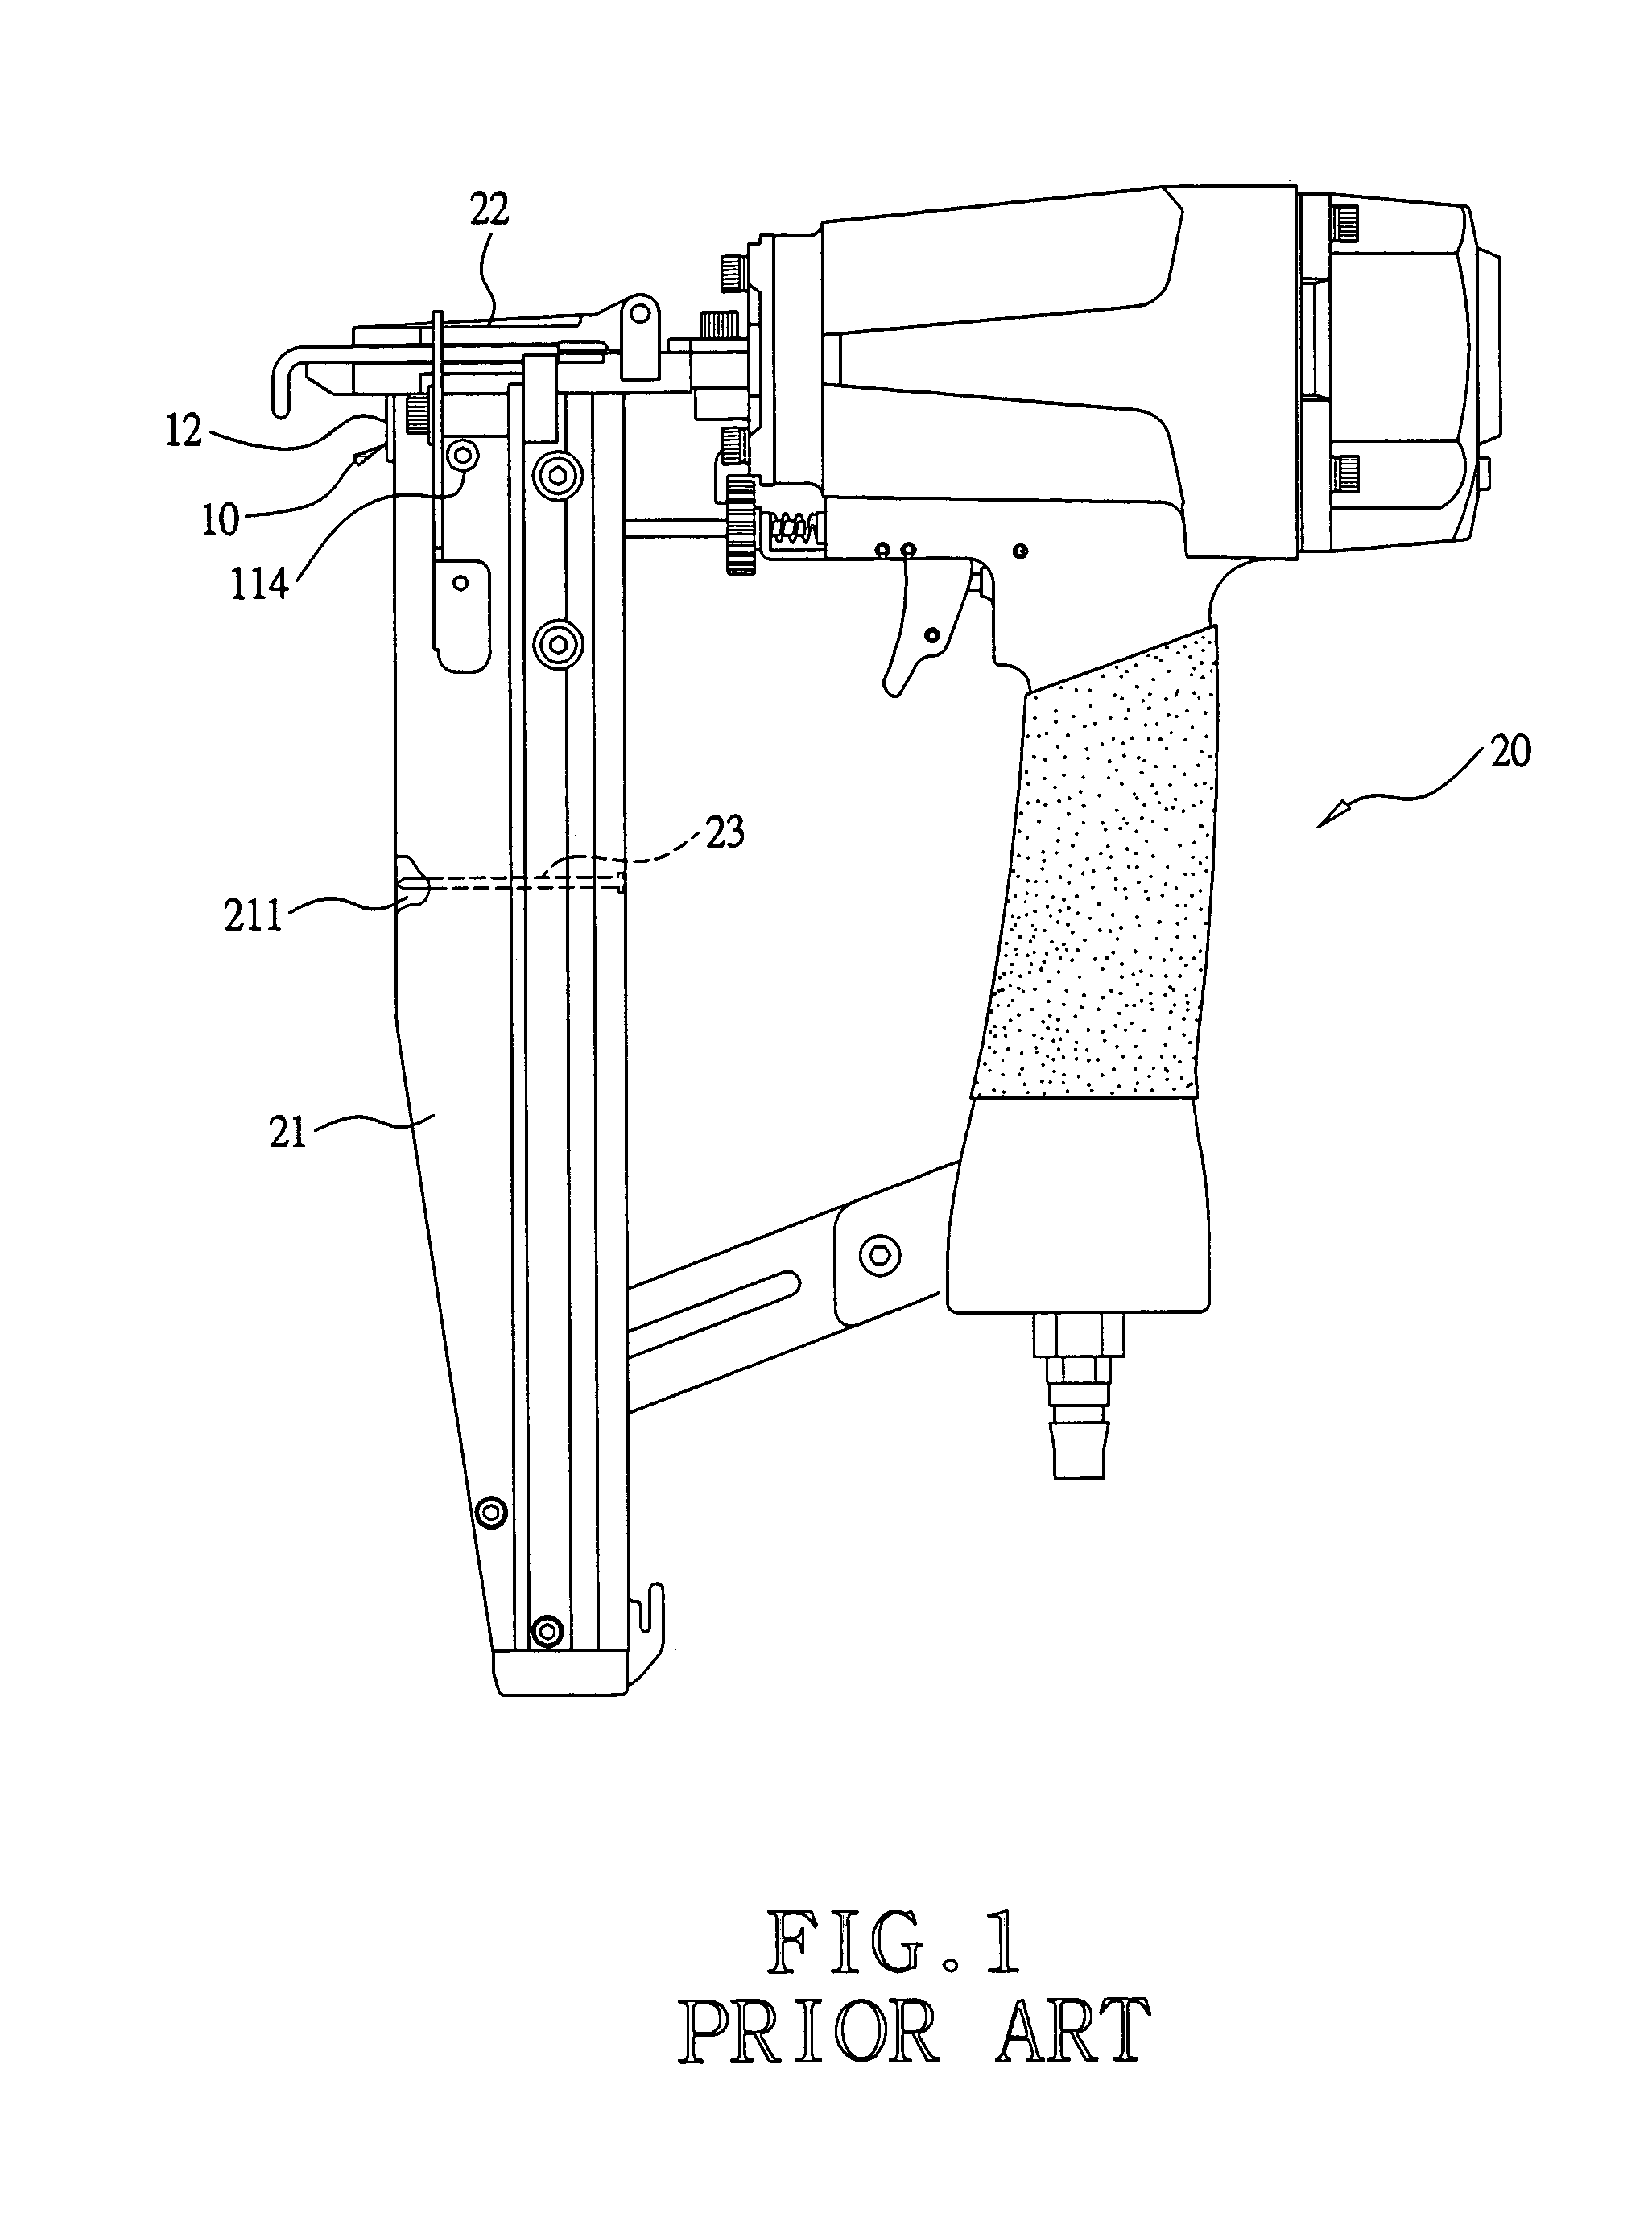 Device for preventing short nails of a nail gun from being deadlocked